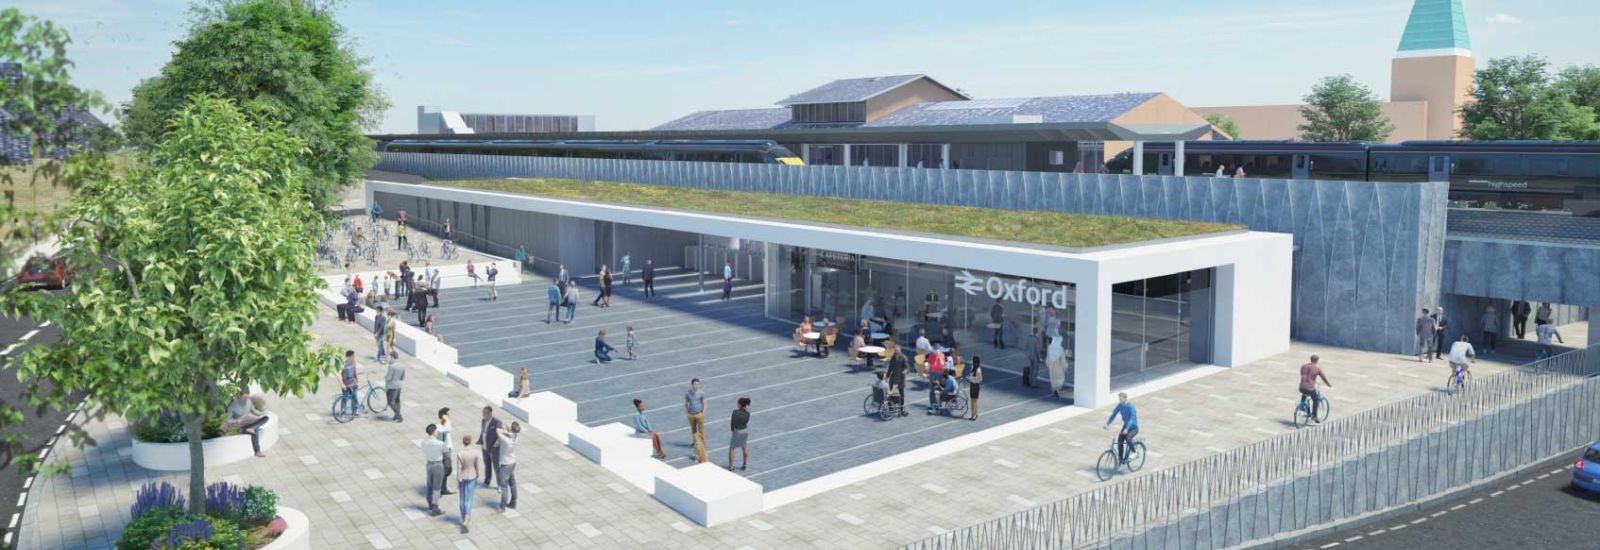 Artist impression of the new and updated Oxford railway station